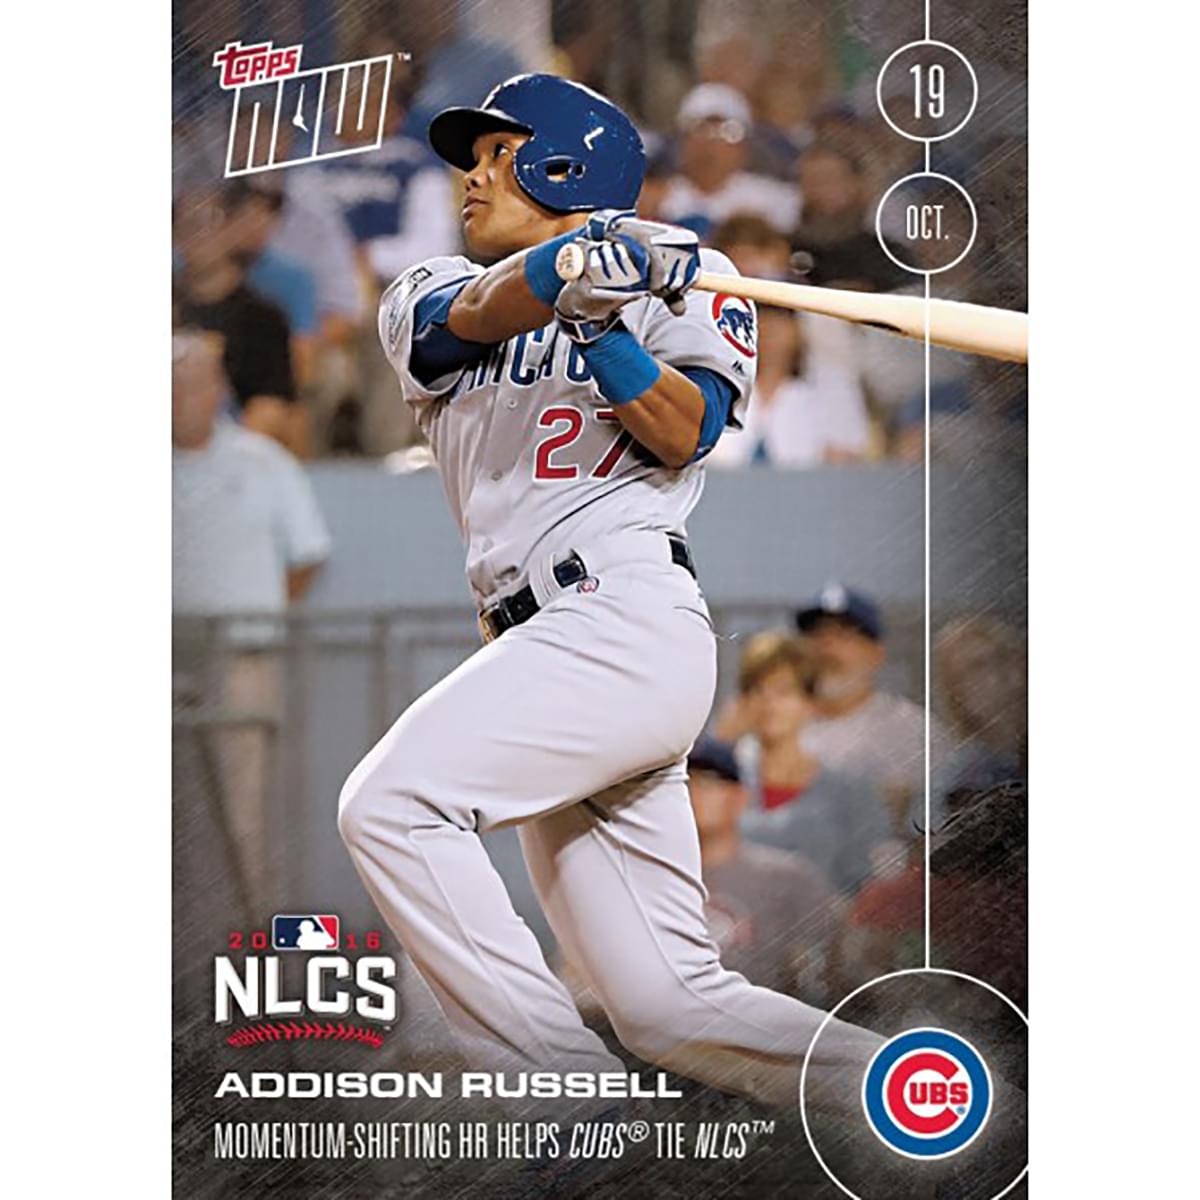 MLB Chicago Cubs Addison Russell #607 2016 Topps NOW Trading Card